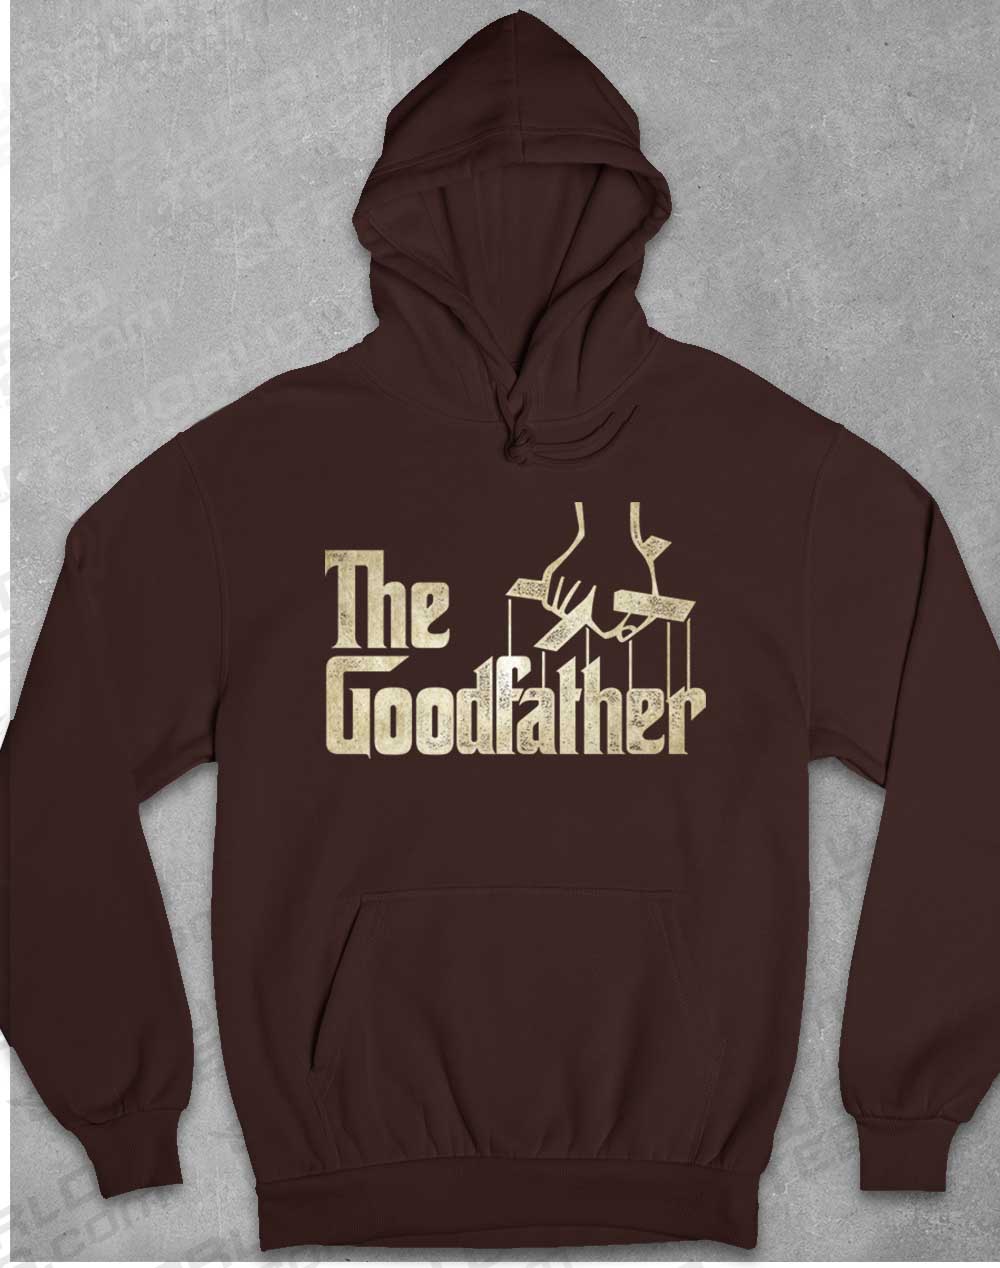 Hot Chocolate - The Goodfather Hoodie